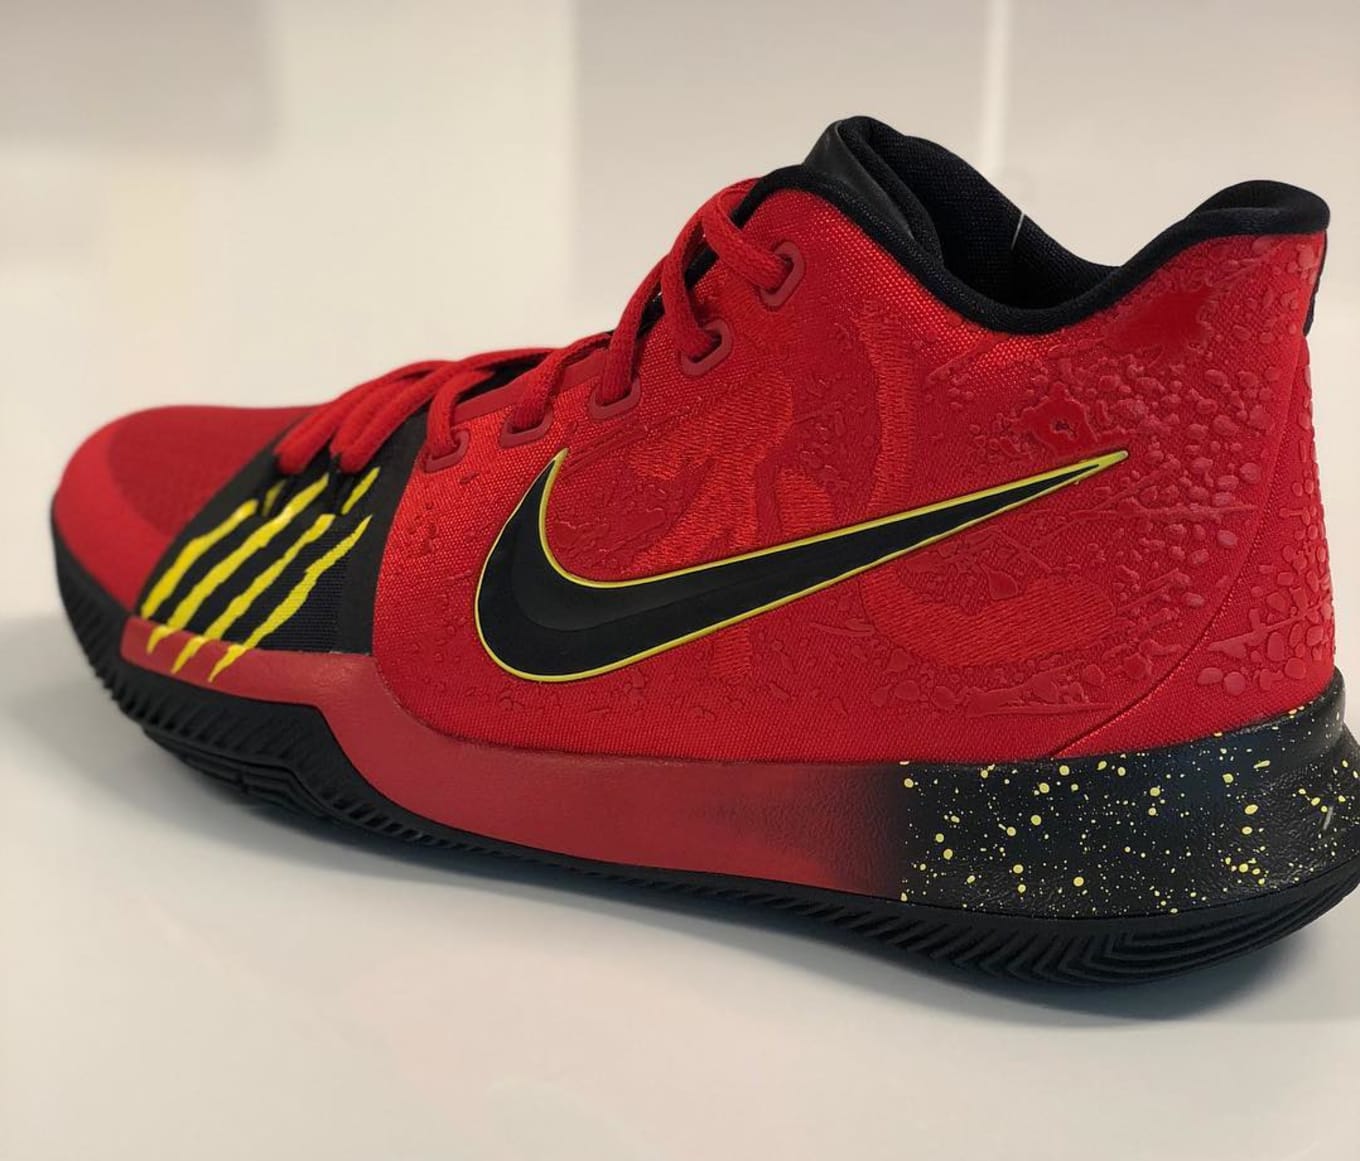 kyrie irving bruce lee shoes online -